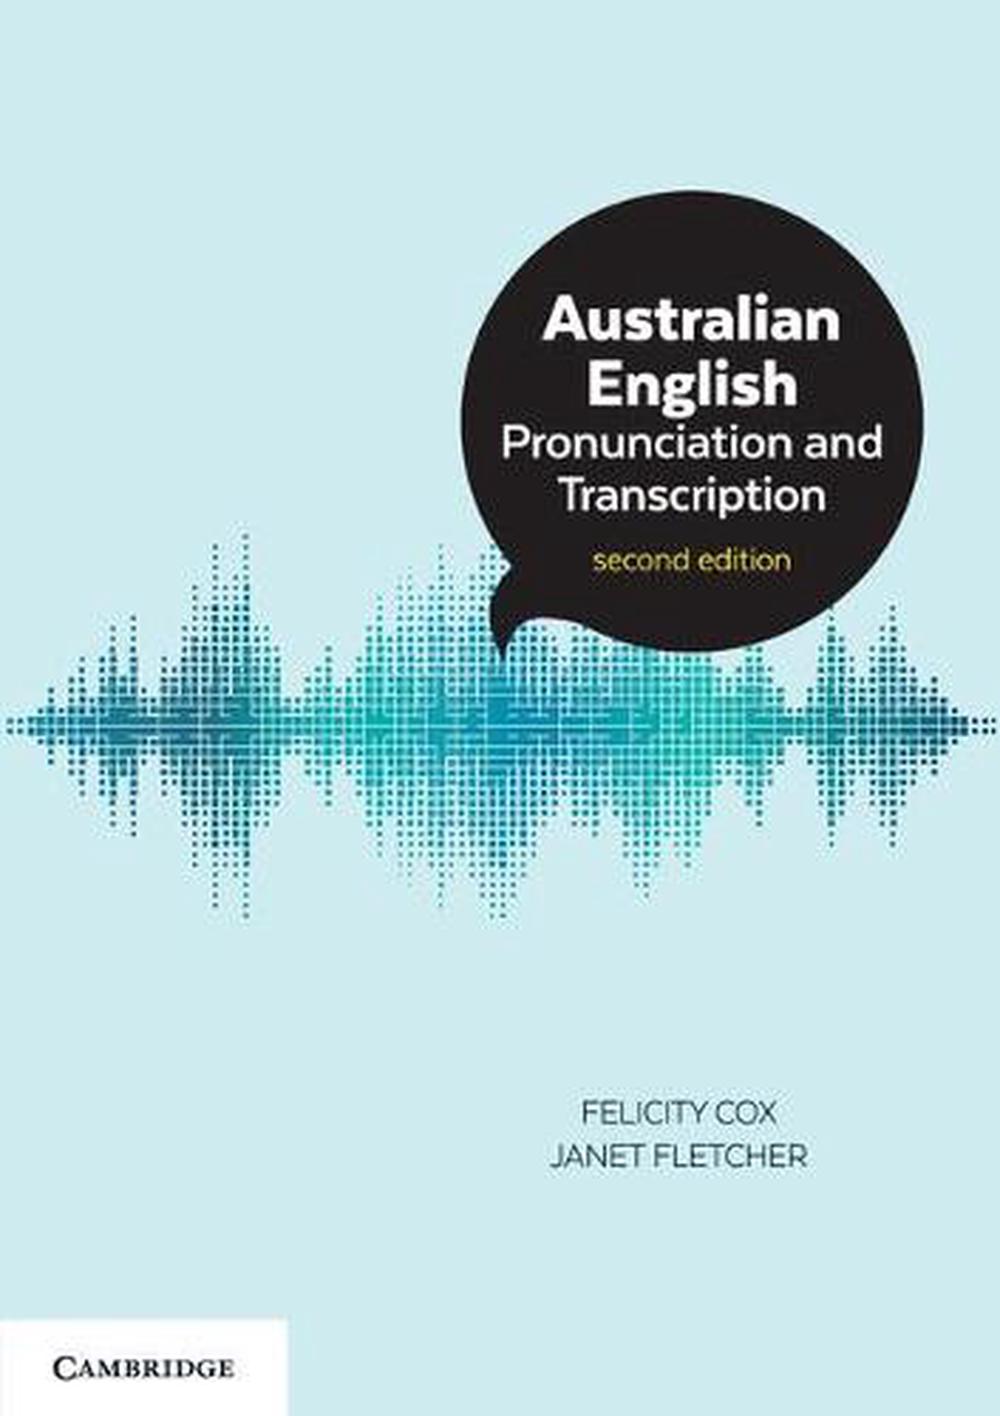 Cox,　The　online　Australian　Nile　by　Edition　and　9781316639269　Buy　English　Pronunciation　Felicity　Paperback,　Transcription,　2nd　at